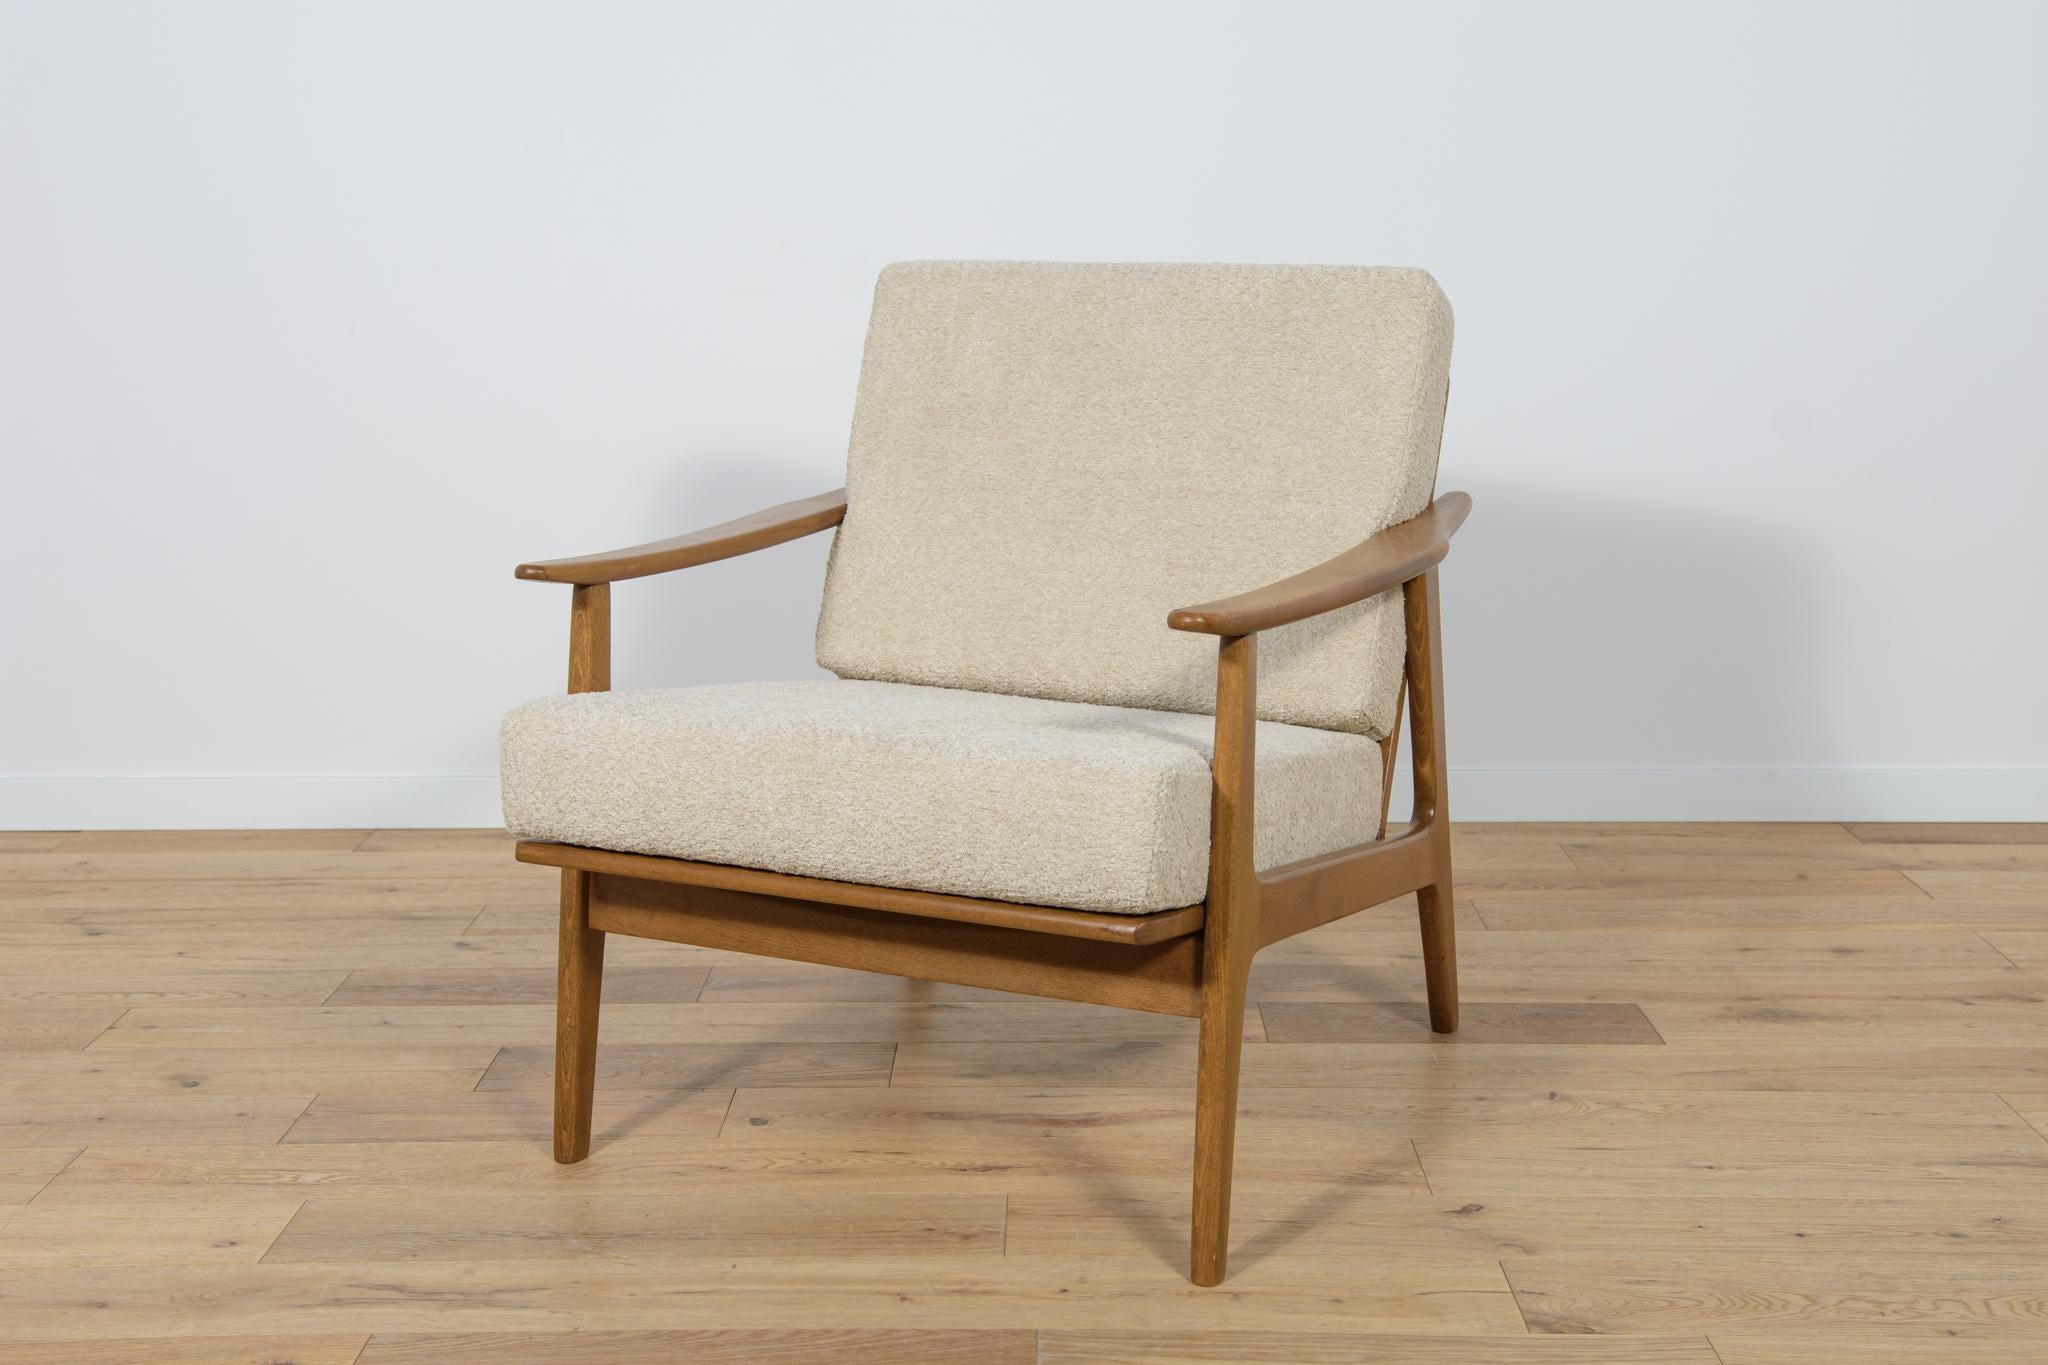  Mid Century Polish Armchairs Model 5825, 1960s, set of 2 For Sale 2